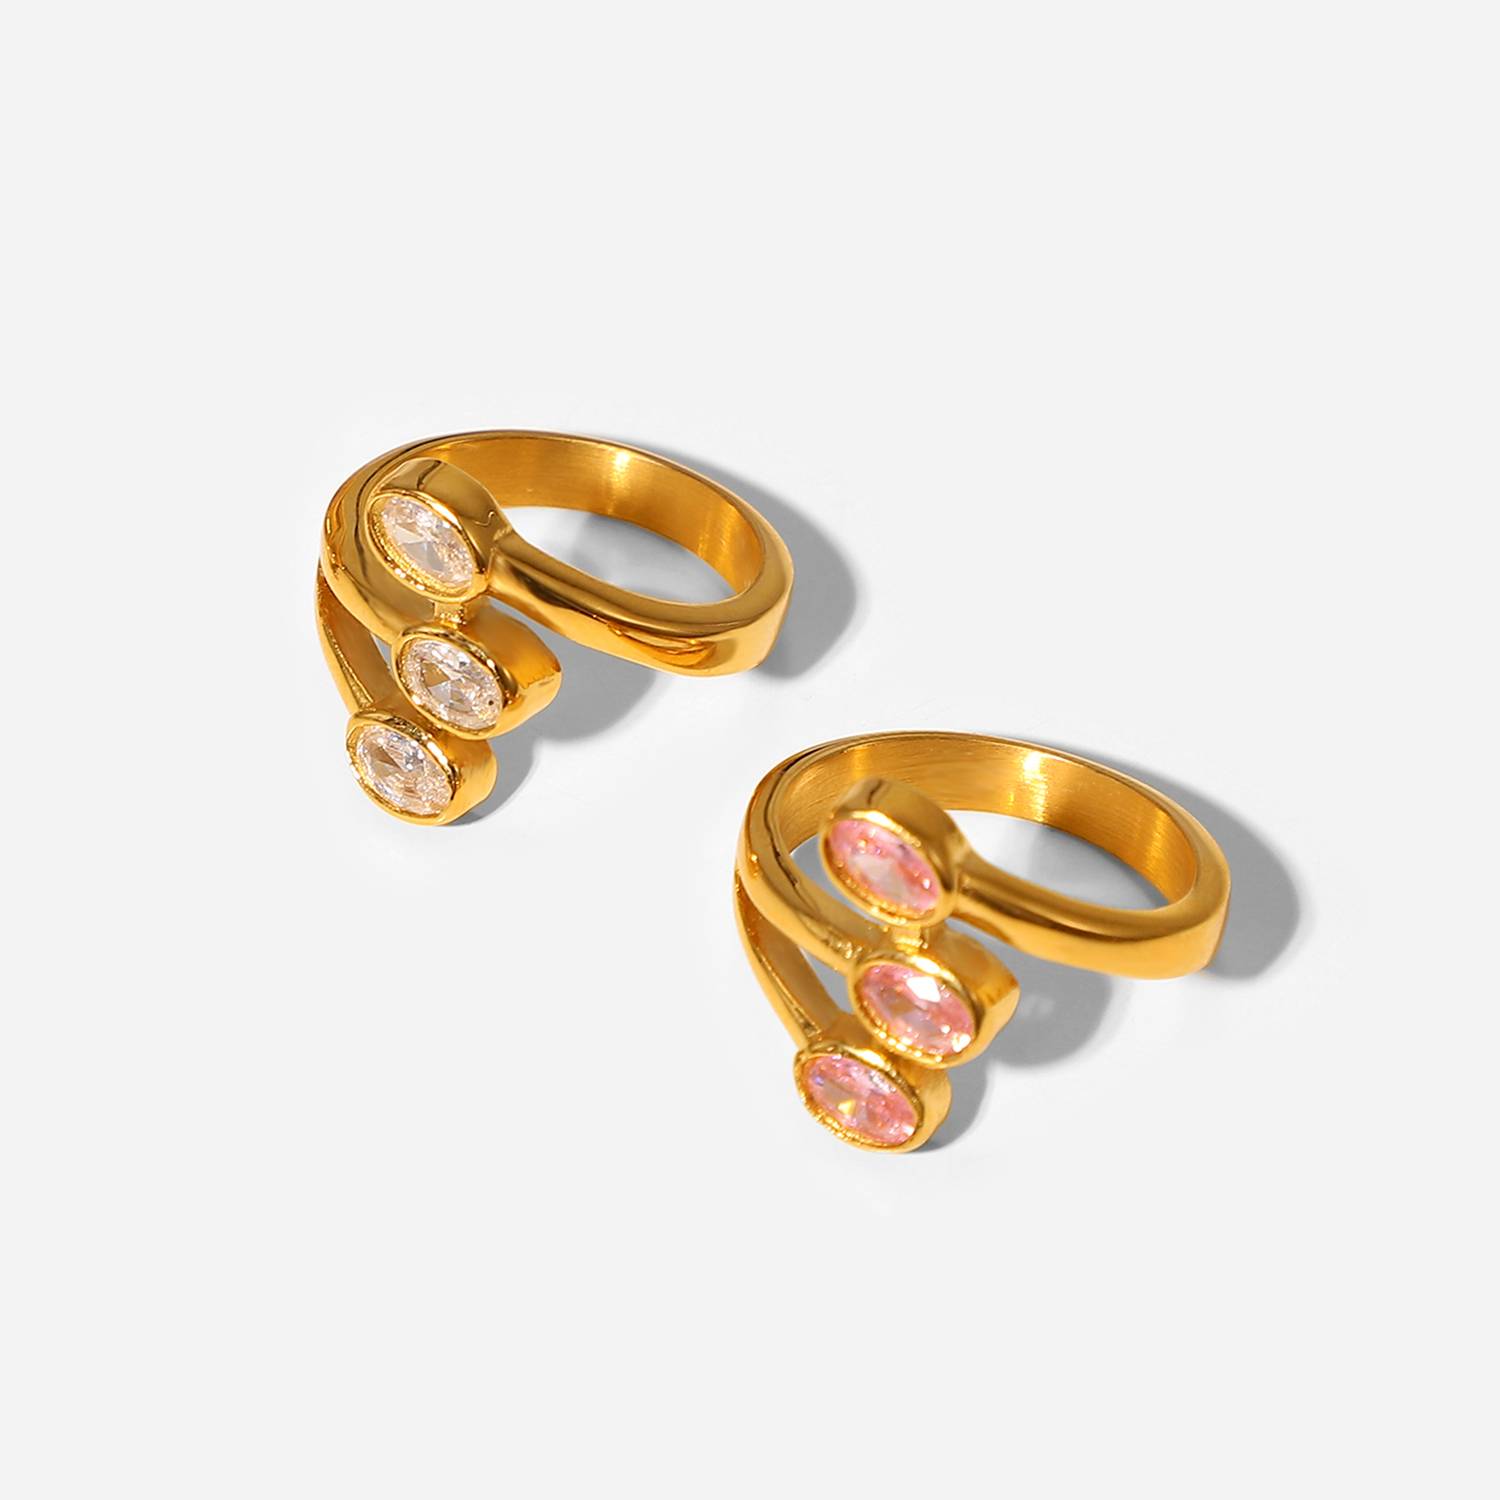 2022 New Arrival 18K PVD Gold Plated Multilayer Zircon Rings Jewelry Leaf Shape Three Pink Clear Zircons Finger Rings For Women